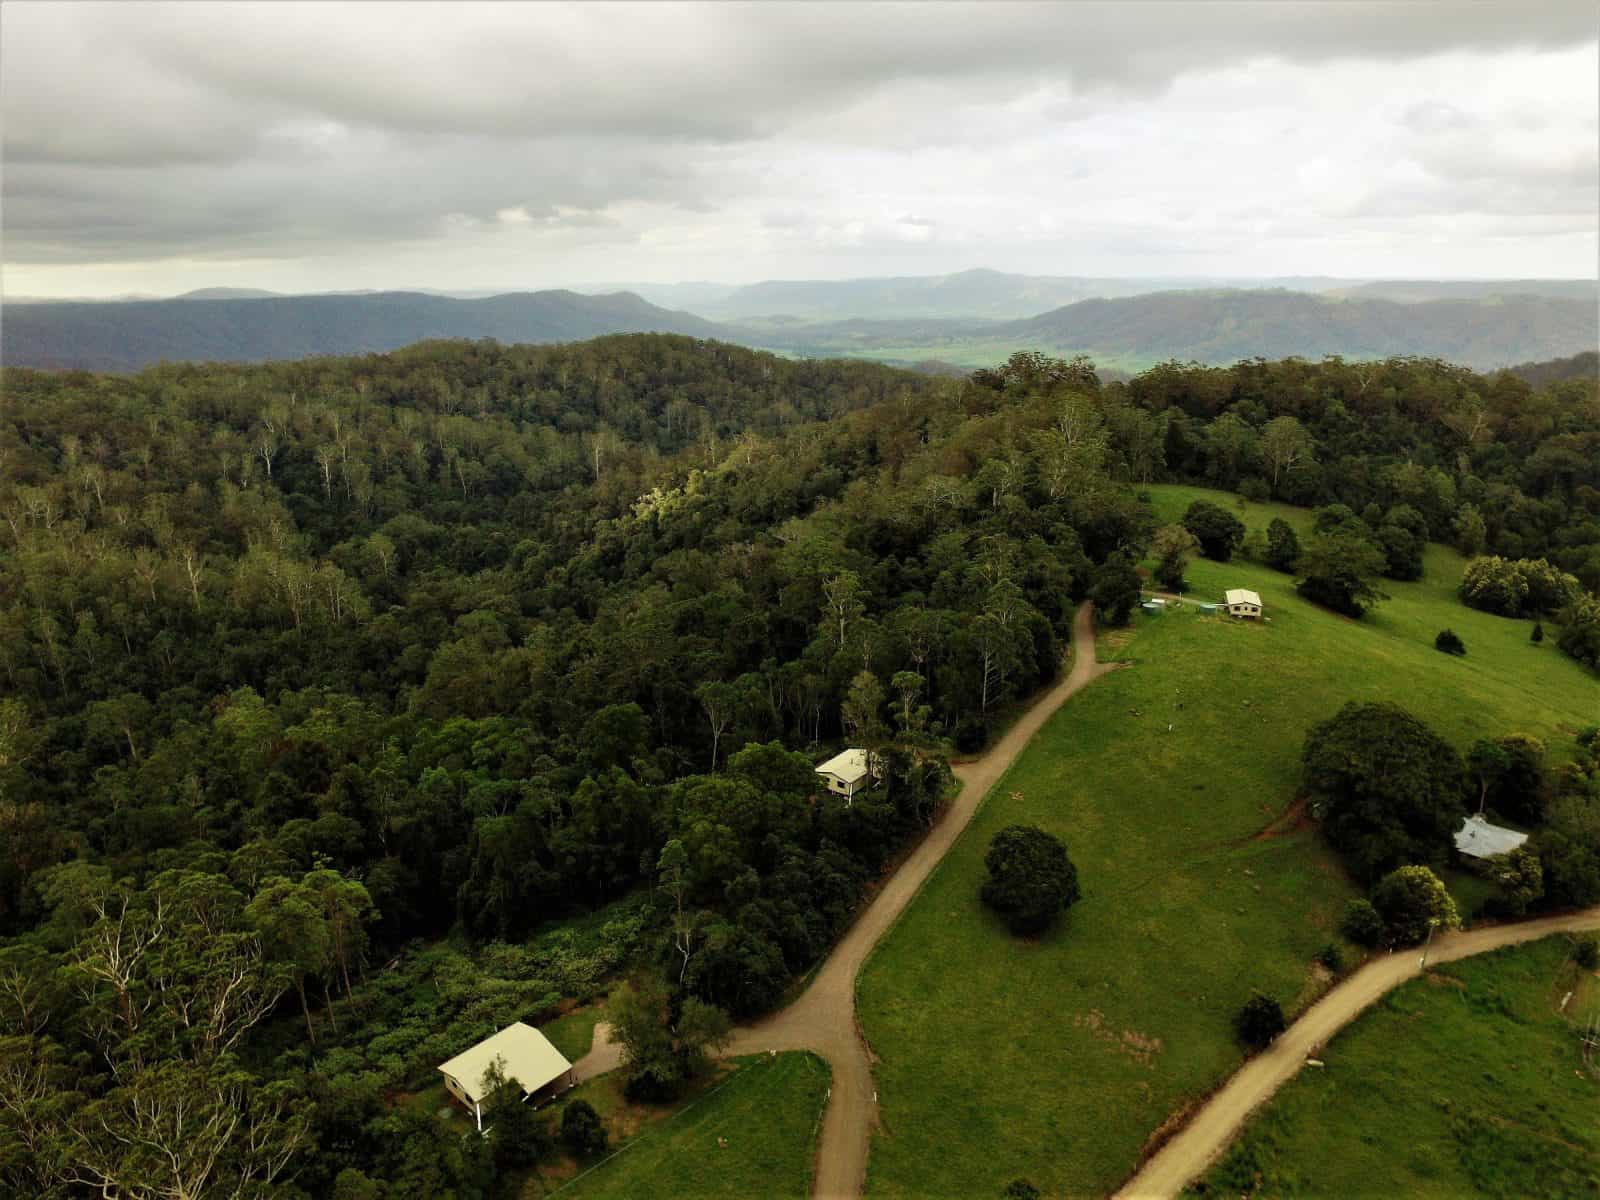 Private self contained accommodation with rainforest , wildlife, waterfalls and walking tracks